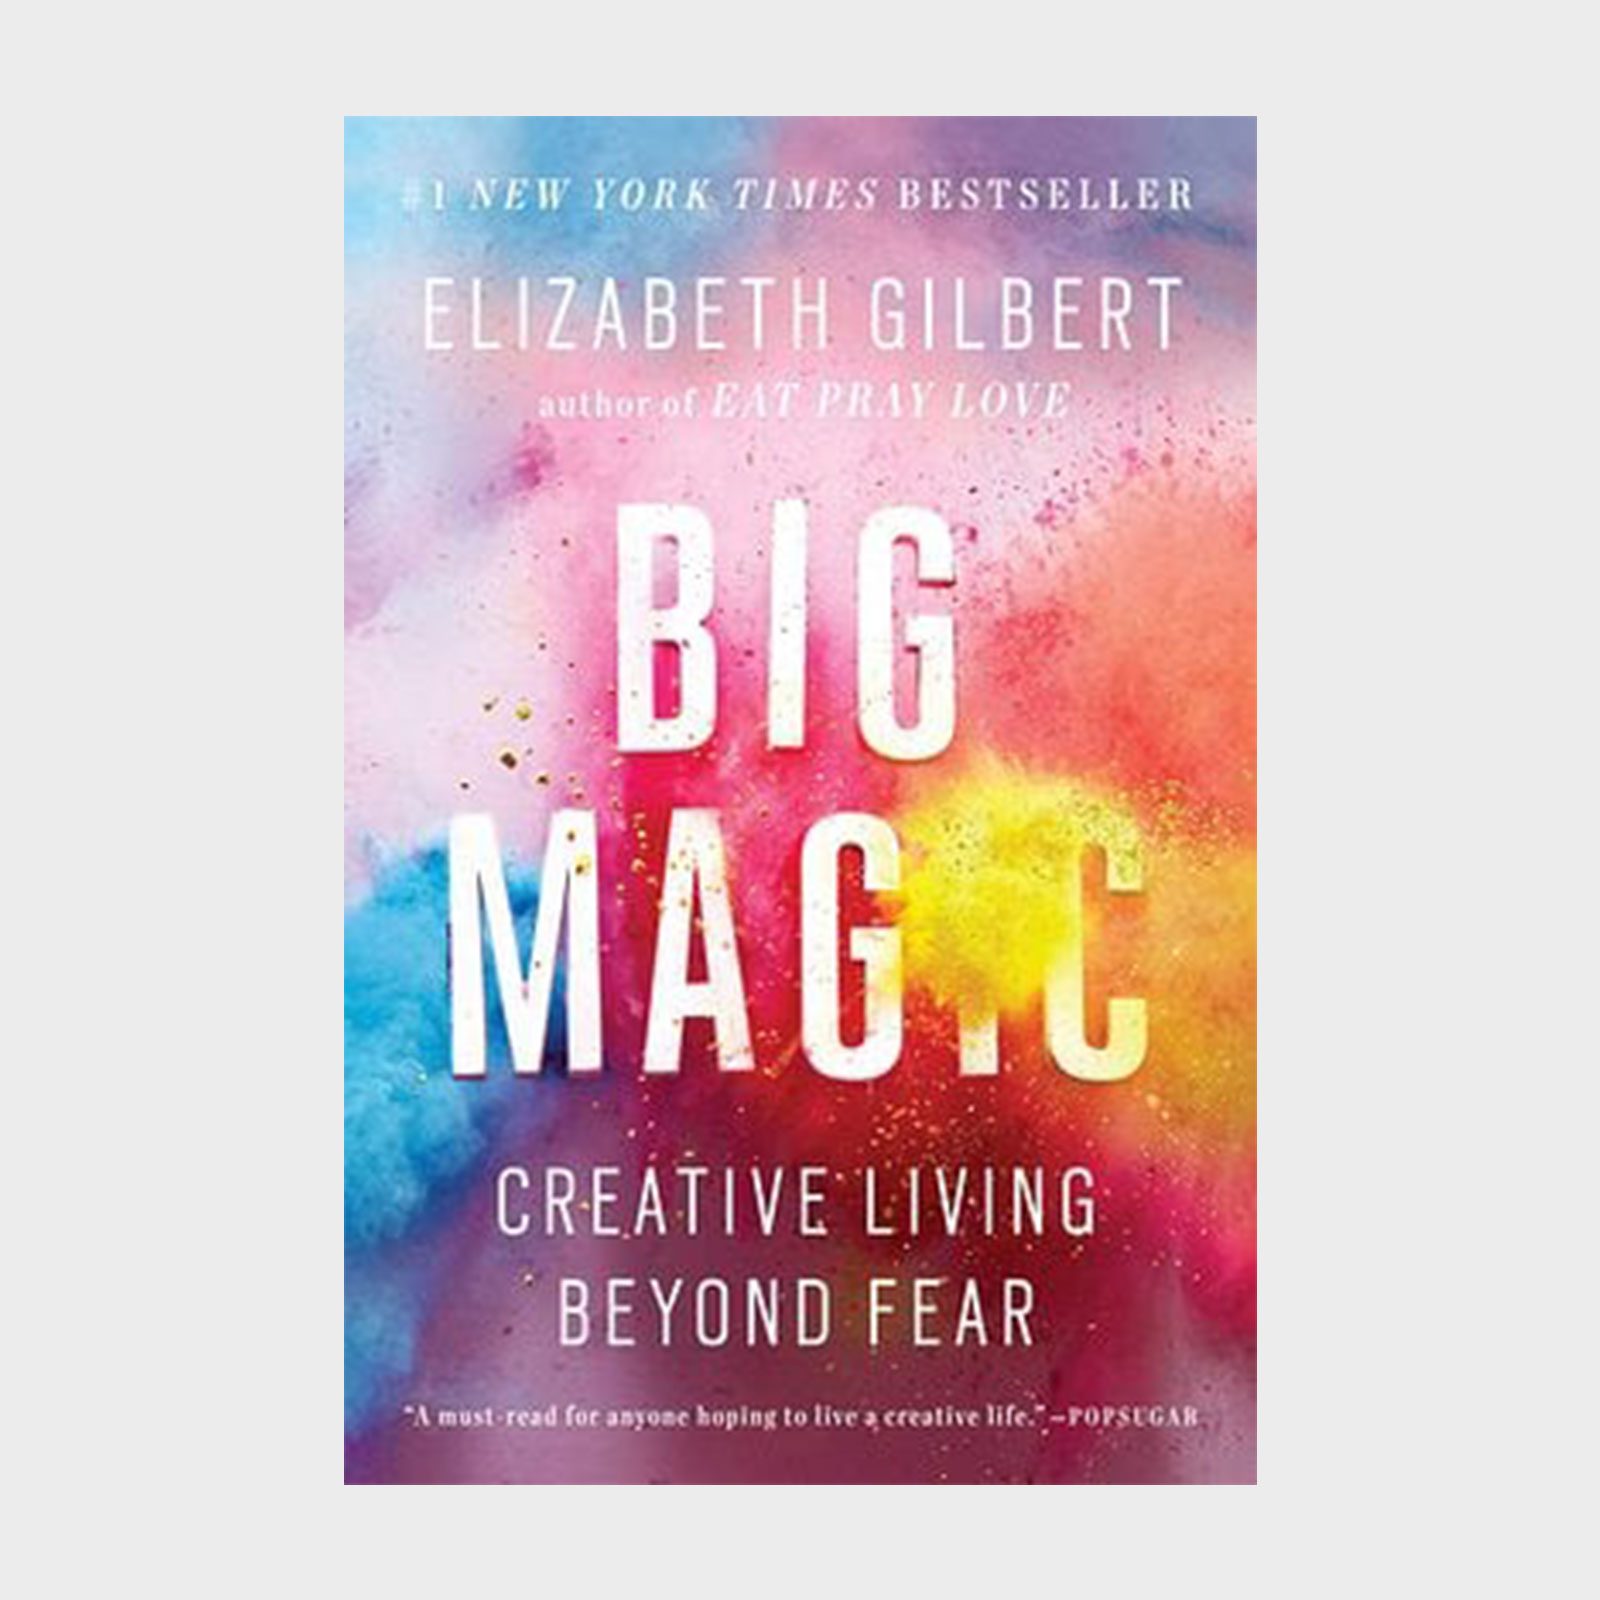 <p>From Elizabeth Gilbert, author of <em>Eat, Pray, Love,</em> is an empowering book that seeks to understand the nature of inspiration and creativity. Published in 2016, <a href="https://bookshop.org/p/books/big-magic-creative-living-beyond-fear-elizabeth-gilbert/588716?ean=9781594634727" rel="noopener"><em>Big Magic: Creative Living Without Fear</em></a> features unique insights from Gilbert about tackling the things we love most, facing fears, breaking unhealthy attitudes and embarking on a path toward creativity (at work and at home) with <a href="https://www.rd.com/article/non-negotiables/">non-negotiables</a> like mindfulness and passion.</p> <p class="listicle-page__cta-button-shop"><a class="shop-btn" href="https://bookshop.org/p/books/big-magic-creative-living-beyond-fear-elizabeth-gilbert/588716?ean=9781594634727">Shop Now</a></p>